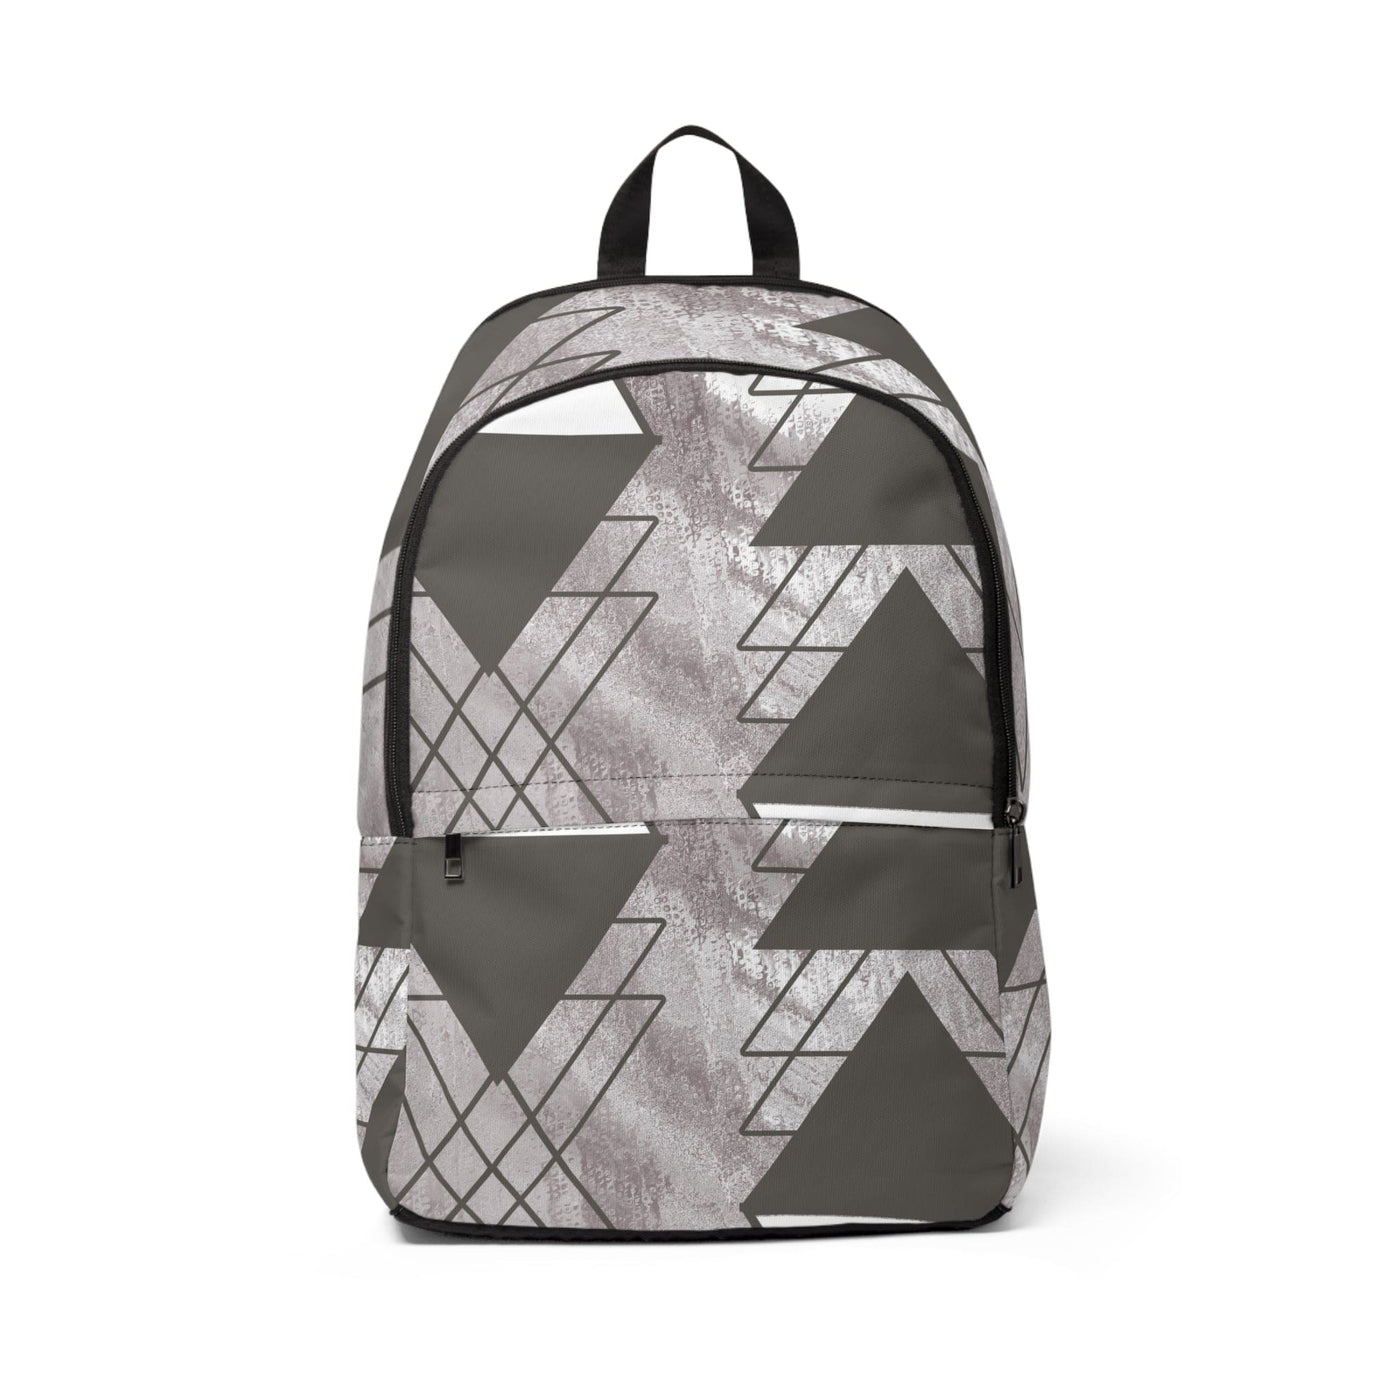 Fashion Backpack Waterproof Ash Grey And White Triangular Colorblock - Bags